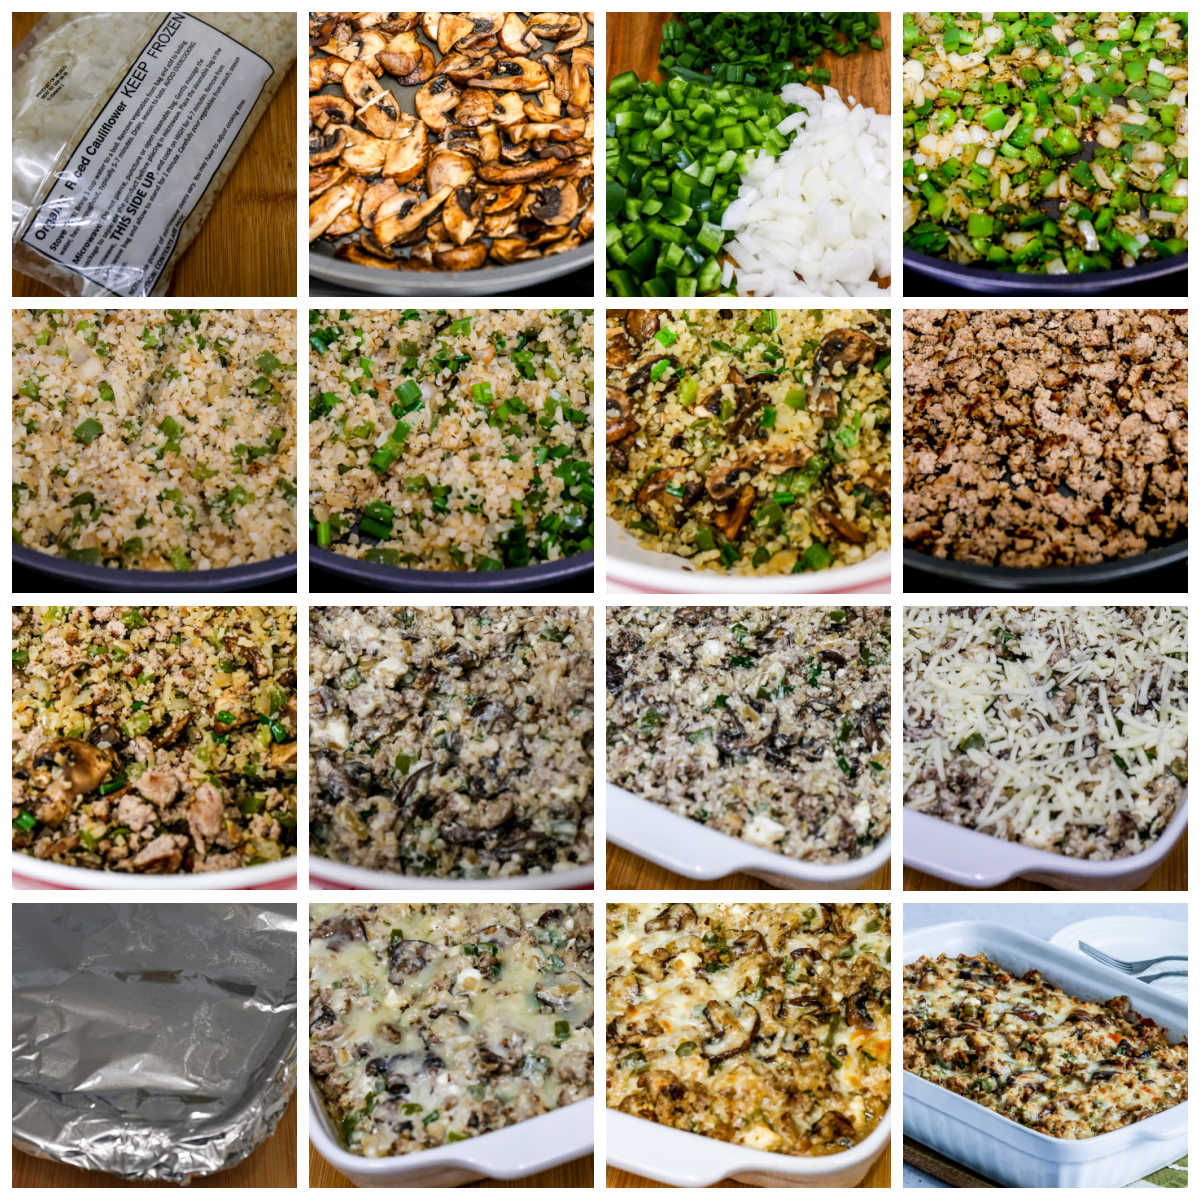 Process shots collage for Ground Turkey Casserole with Cauliflower Rice showing recipe steps.